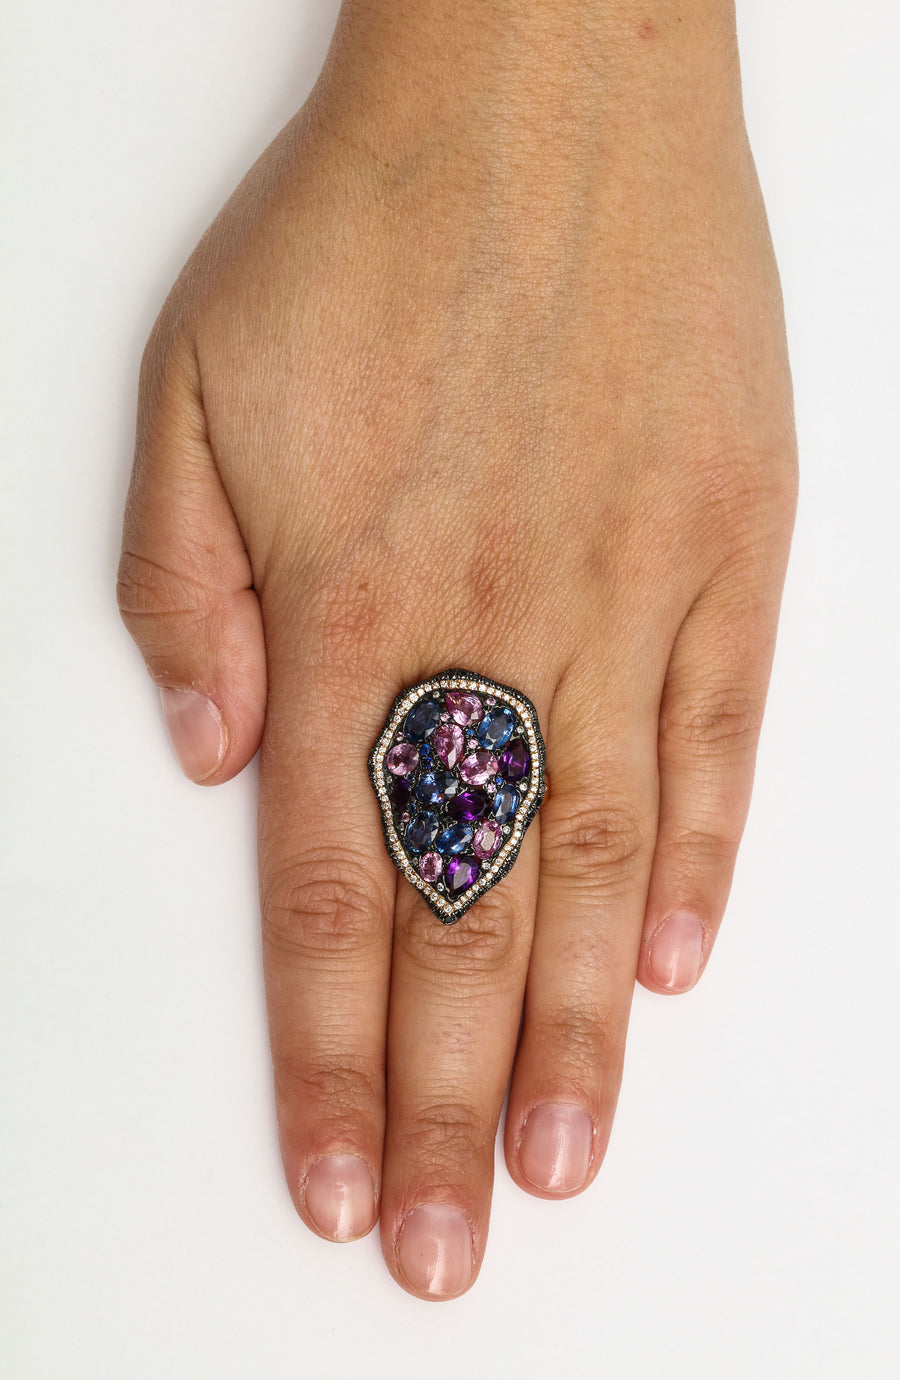 Diamond, Sapphire and Amethyst Cocktail Ring